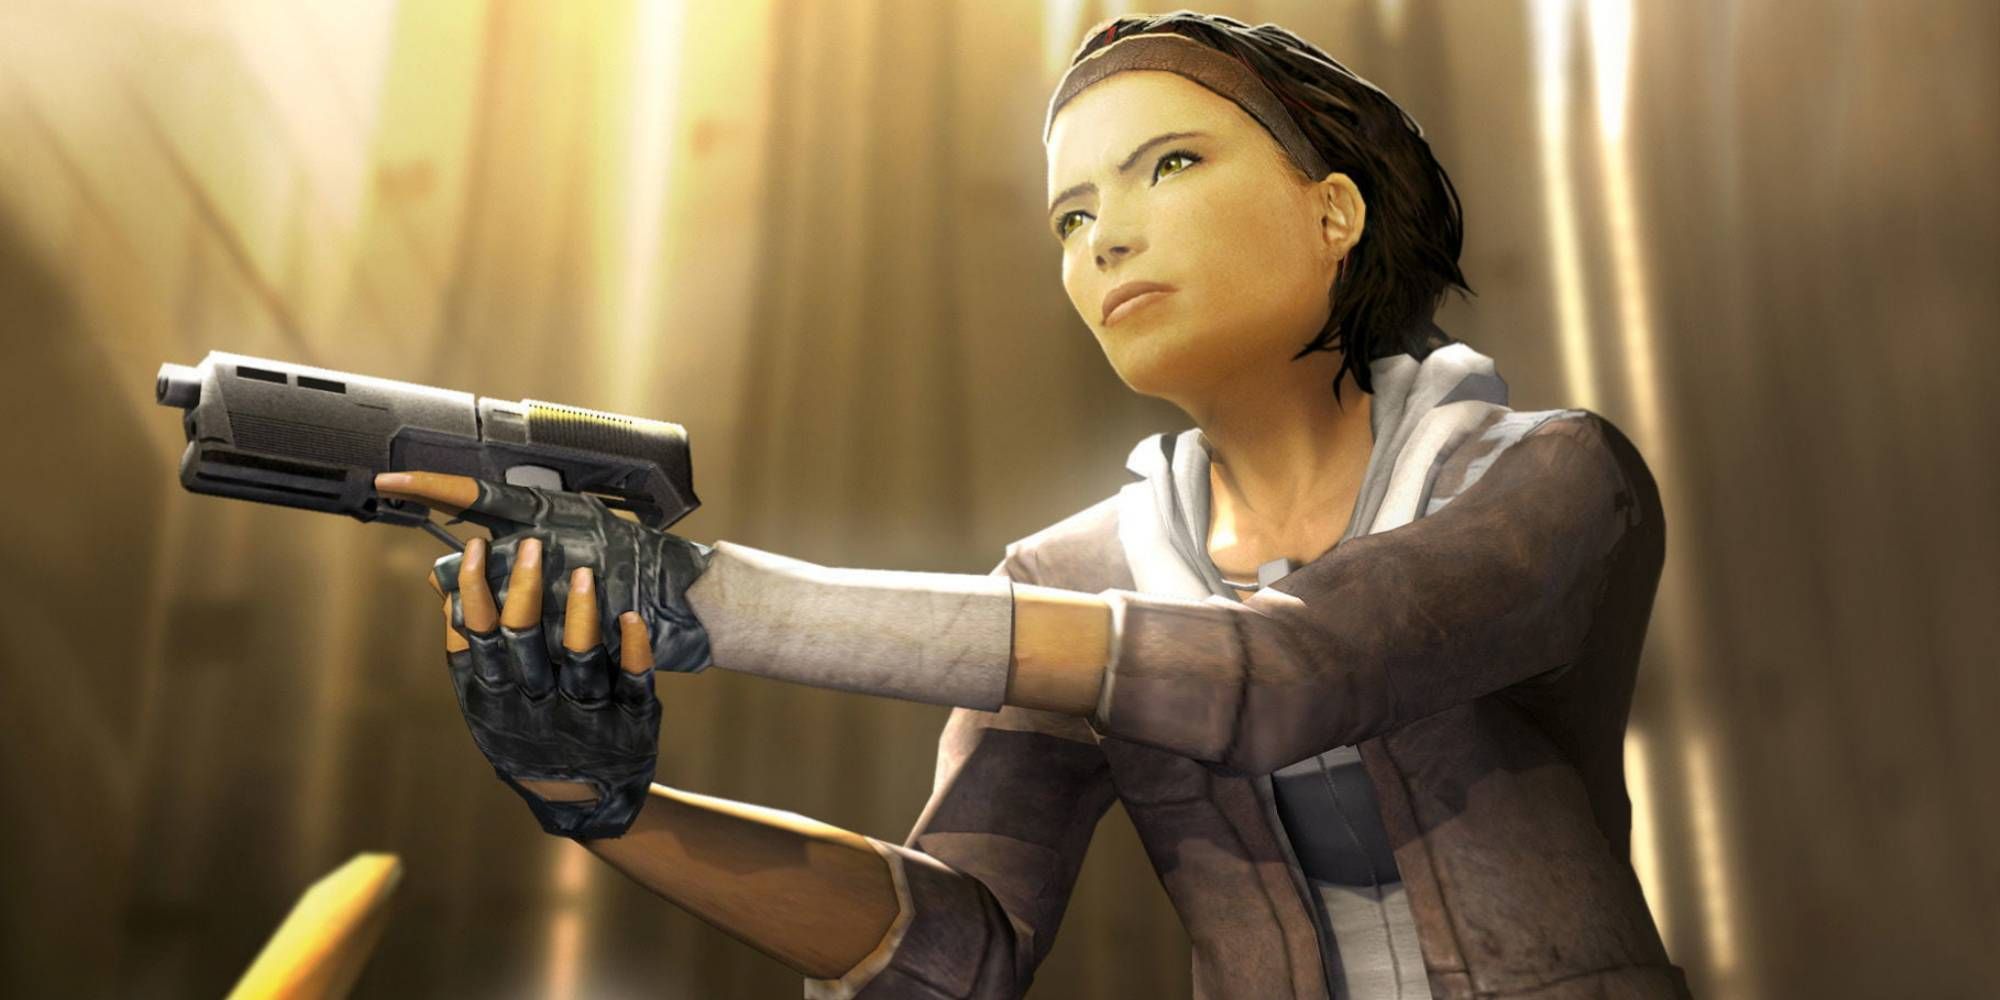 Alyx Vance from Half Life 2 posing with a gun